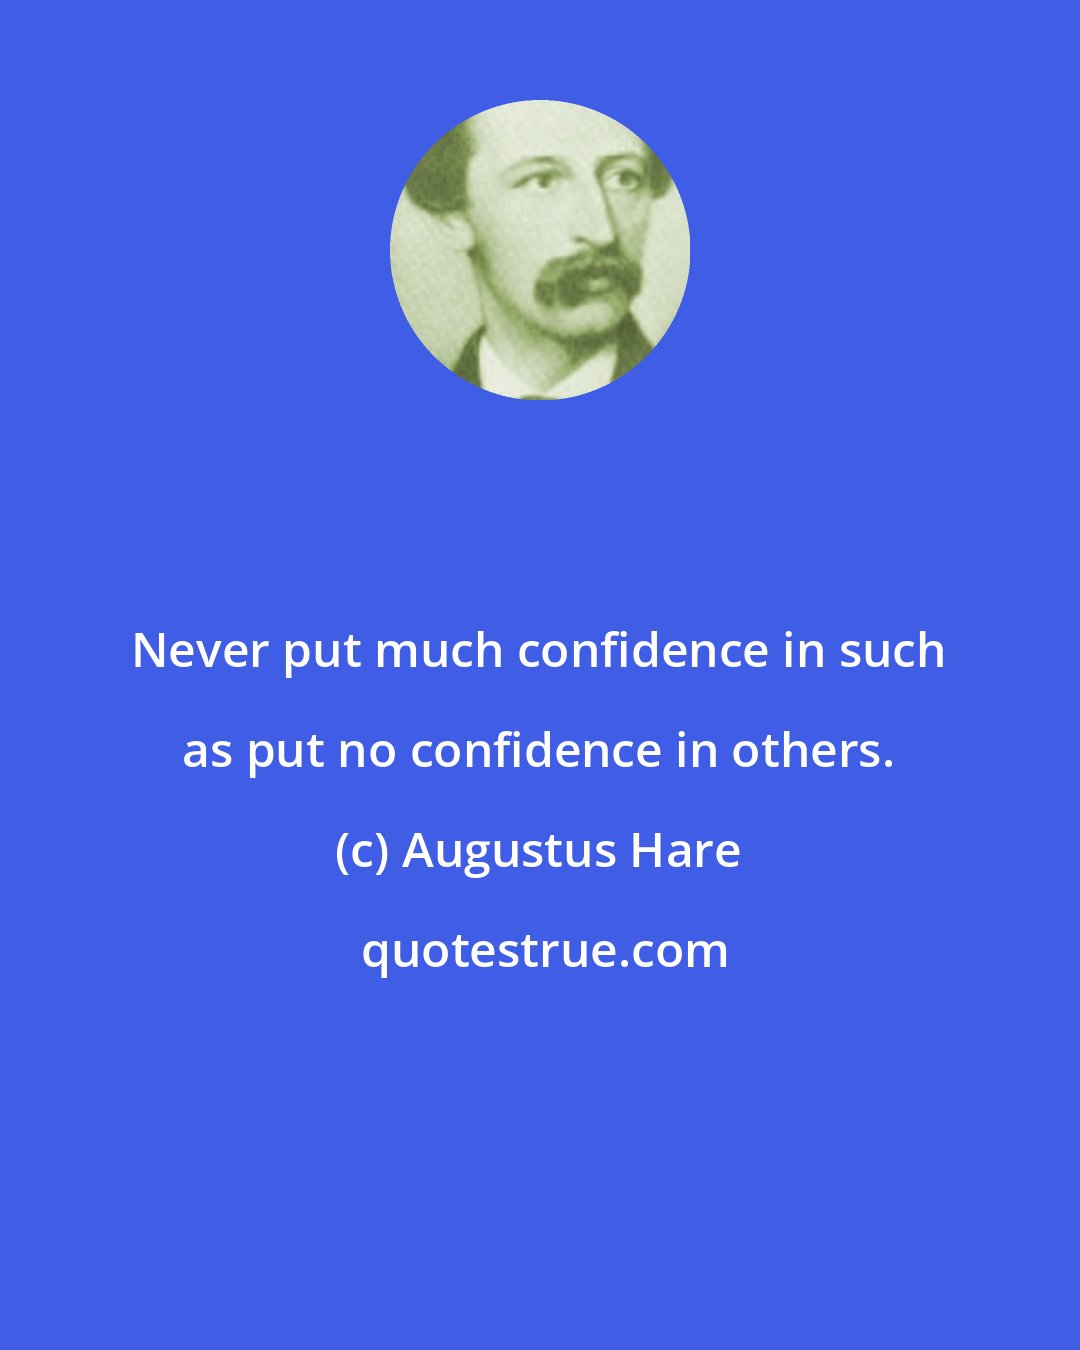 Augustus Hare: Never put much confidence in such as put no confidence in others.